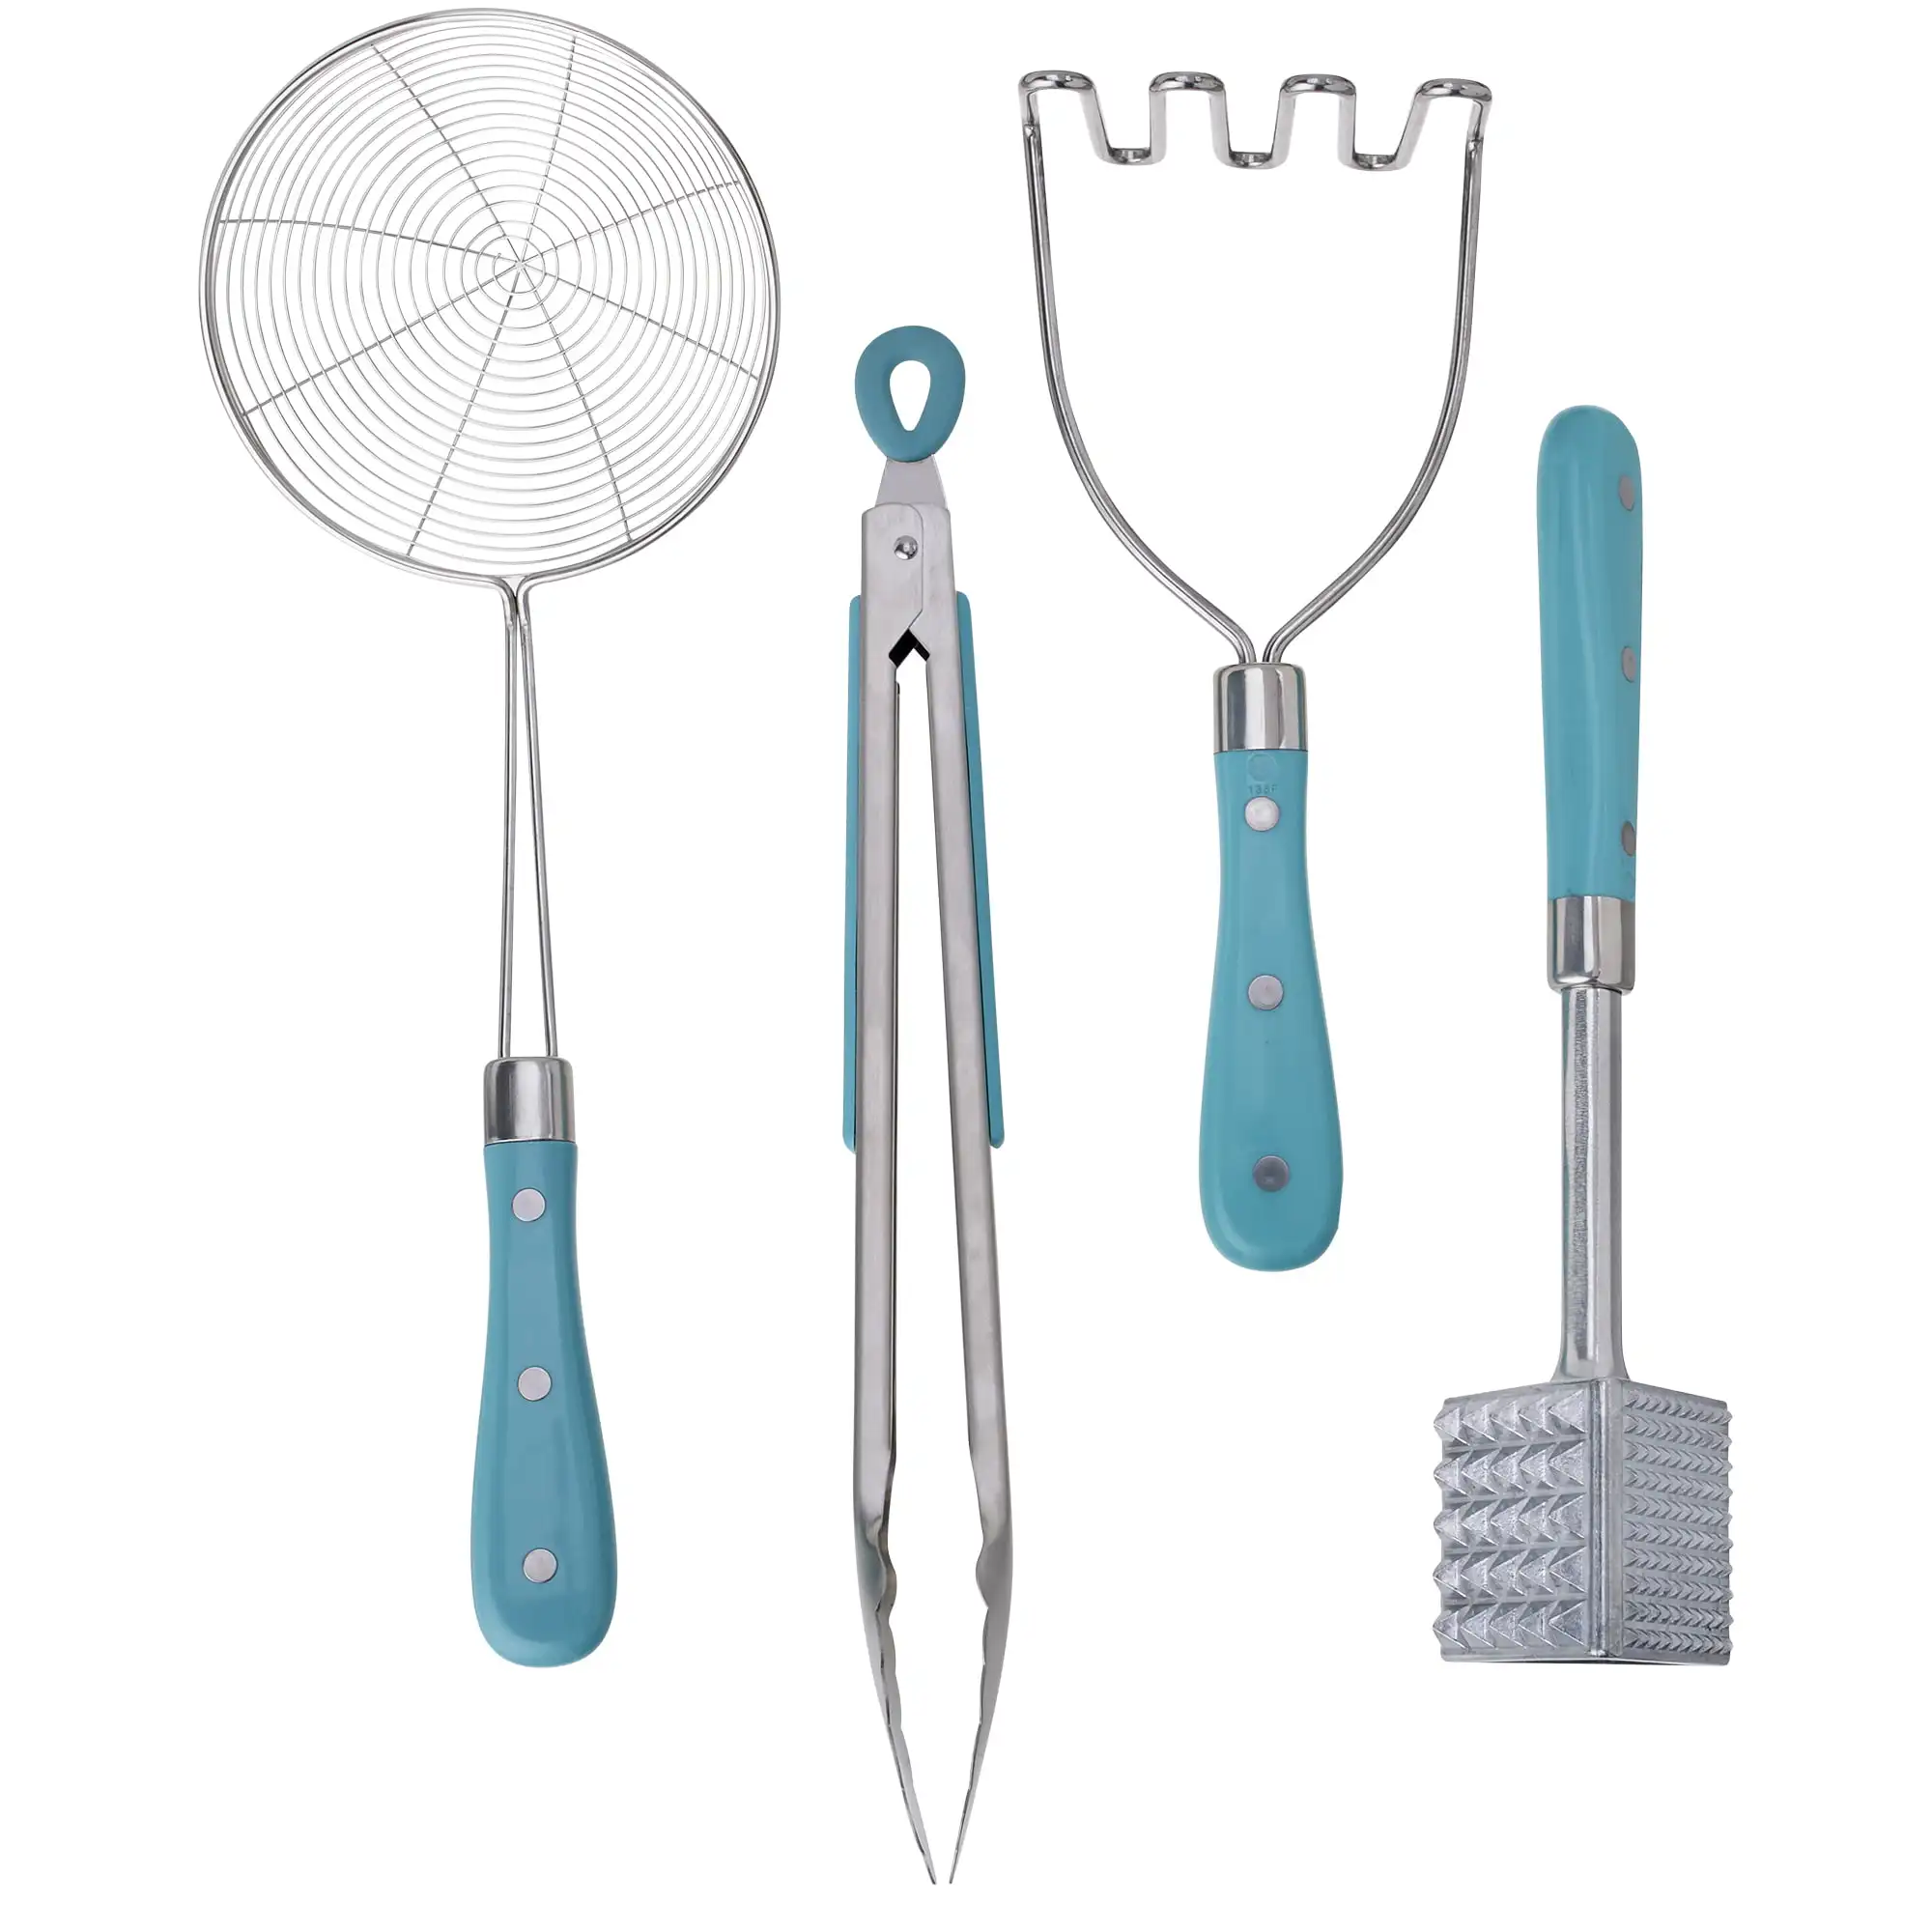 

4-Piece Stainless Steel Kitchen Tool Set with Skimmer, Tongs, Masher, and Tenderizer, Teal